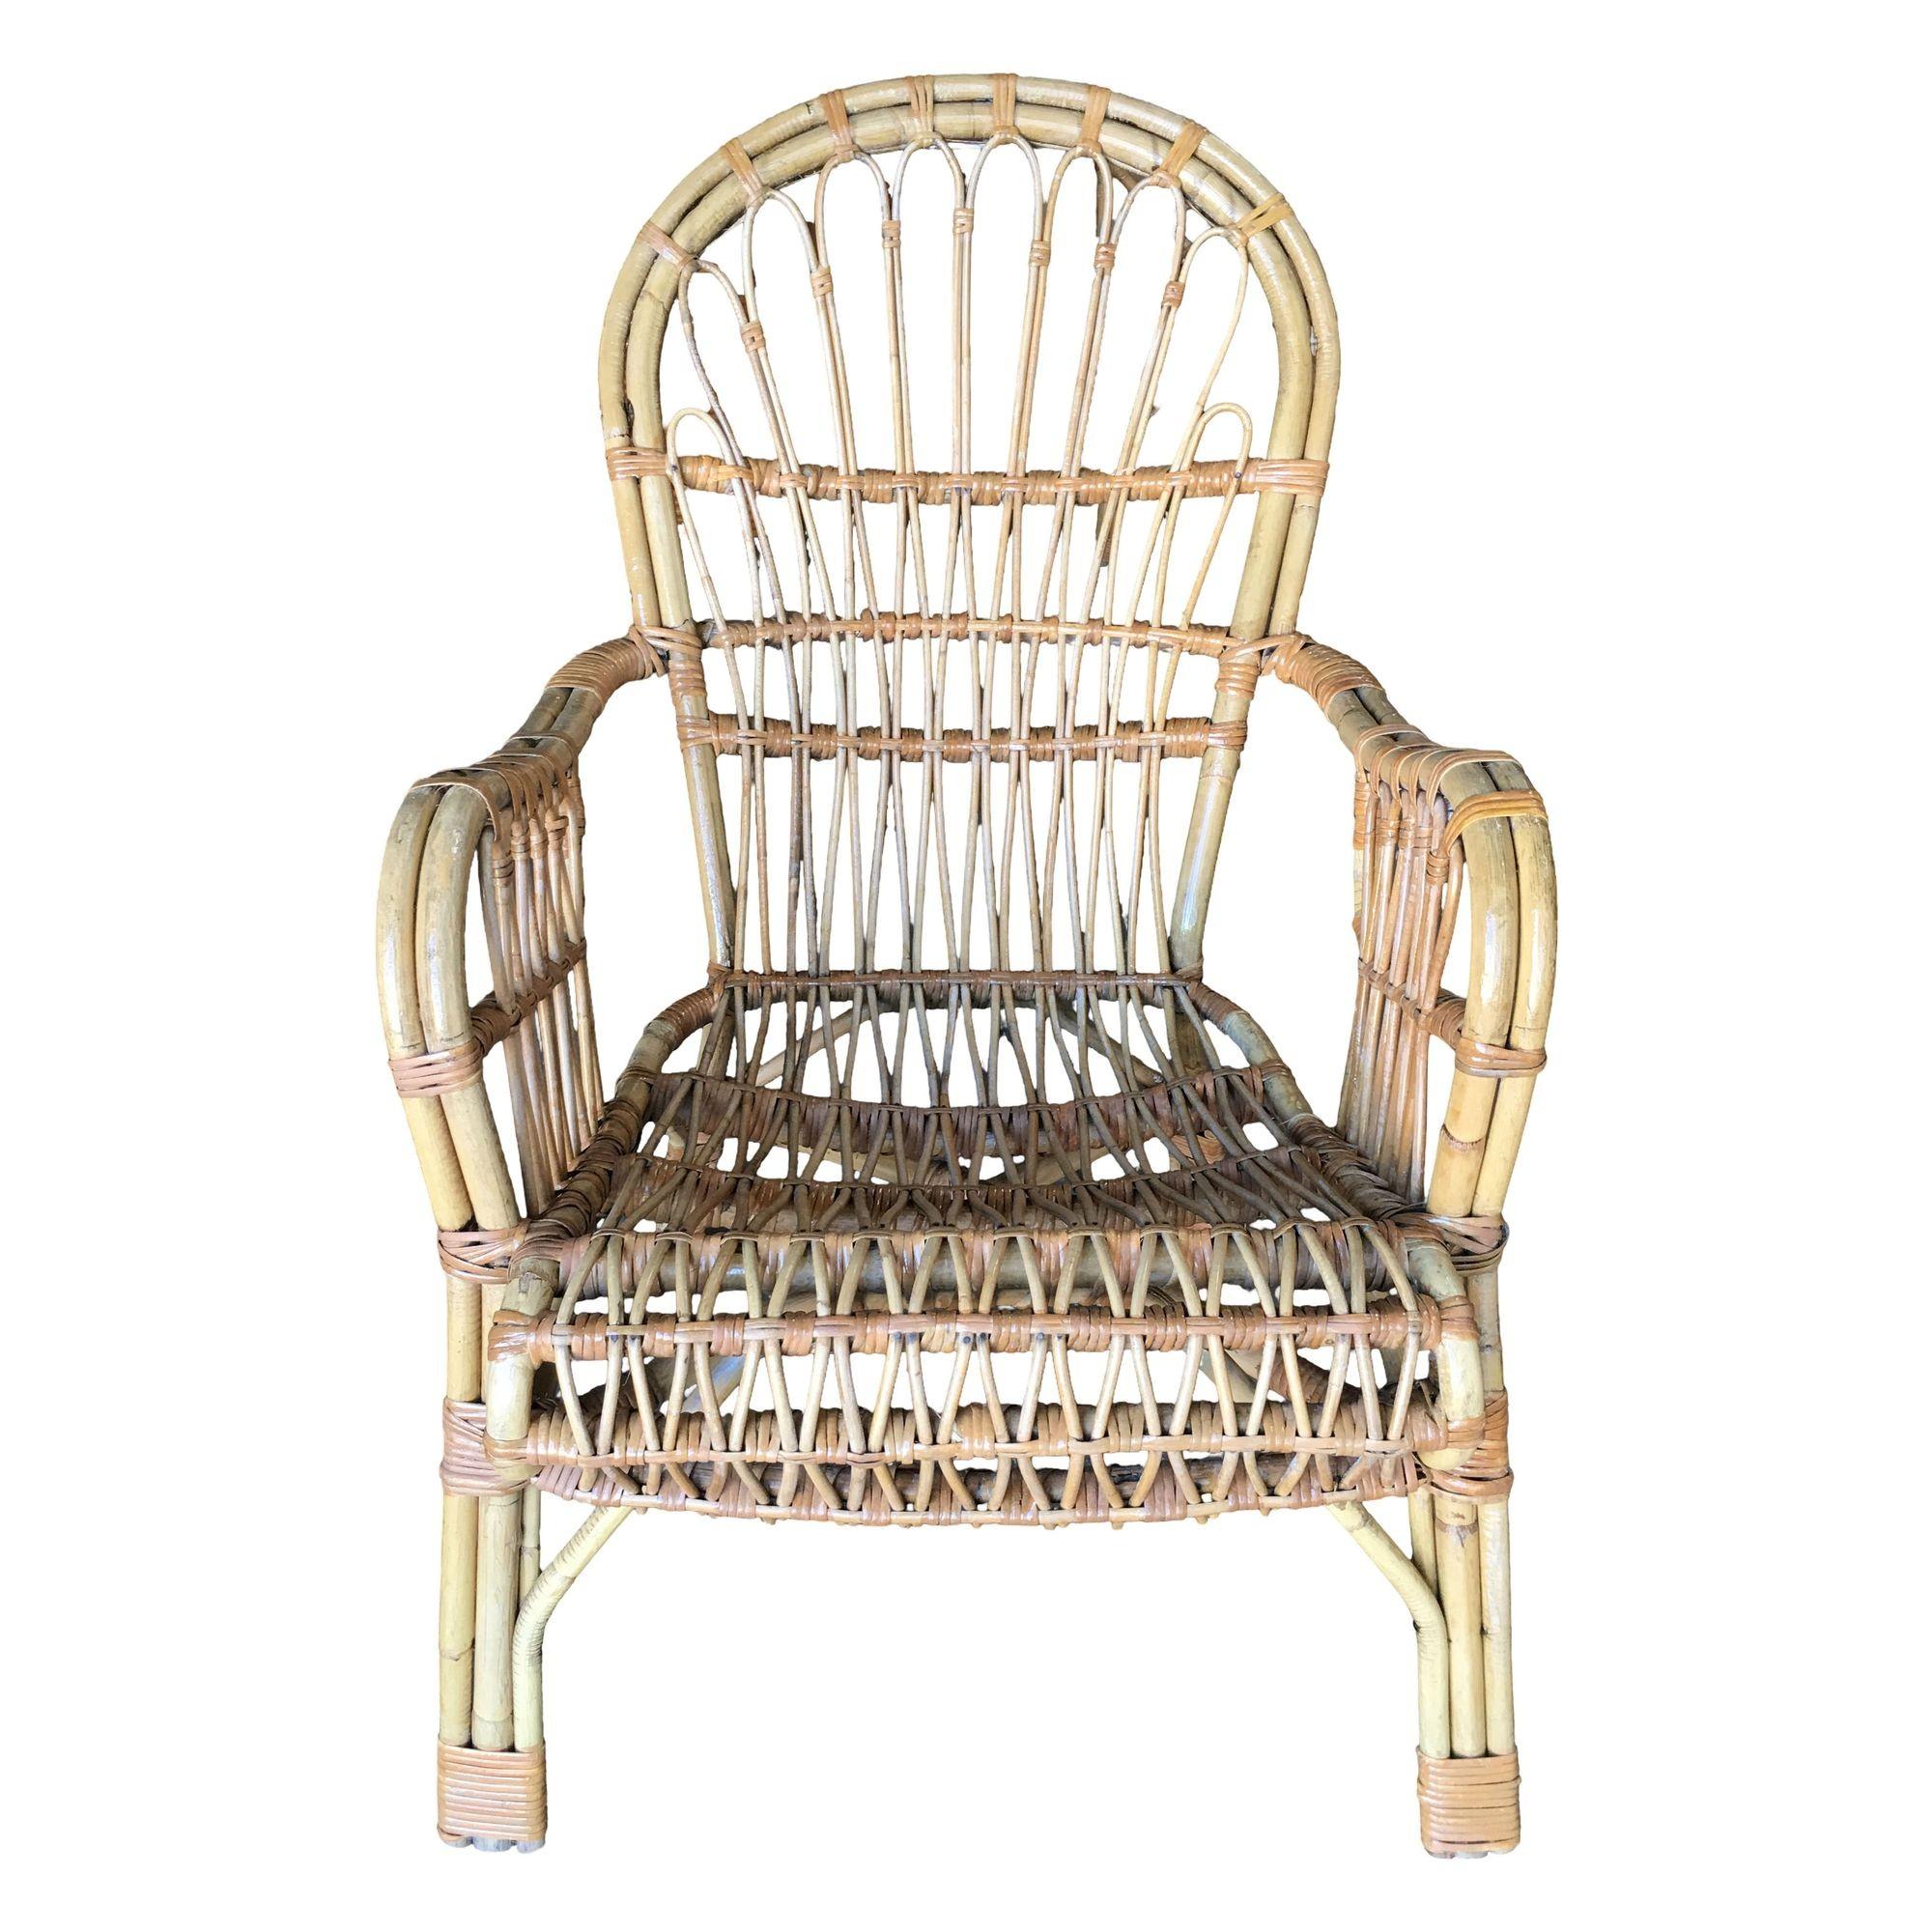 Franco Albini style stick rattan lounge chair featuring unique organic Modernist style.
1960, Italy
We only purchase and sell only the best and finest rattan furniture made by the best and most well-known American designers and manufacturers